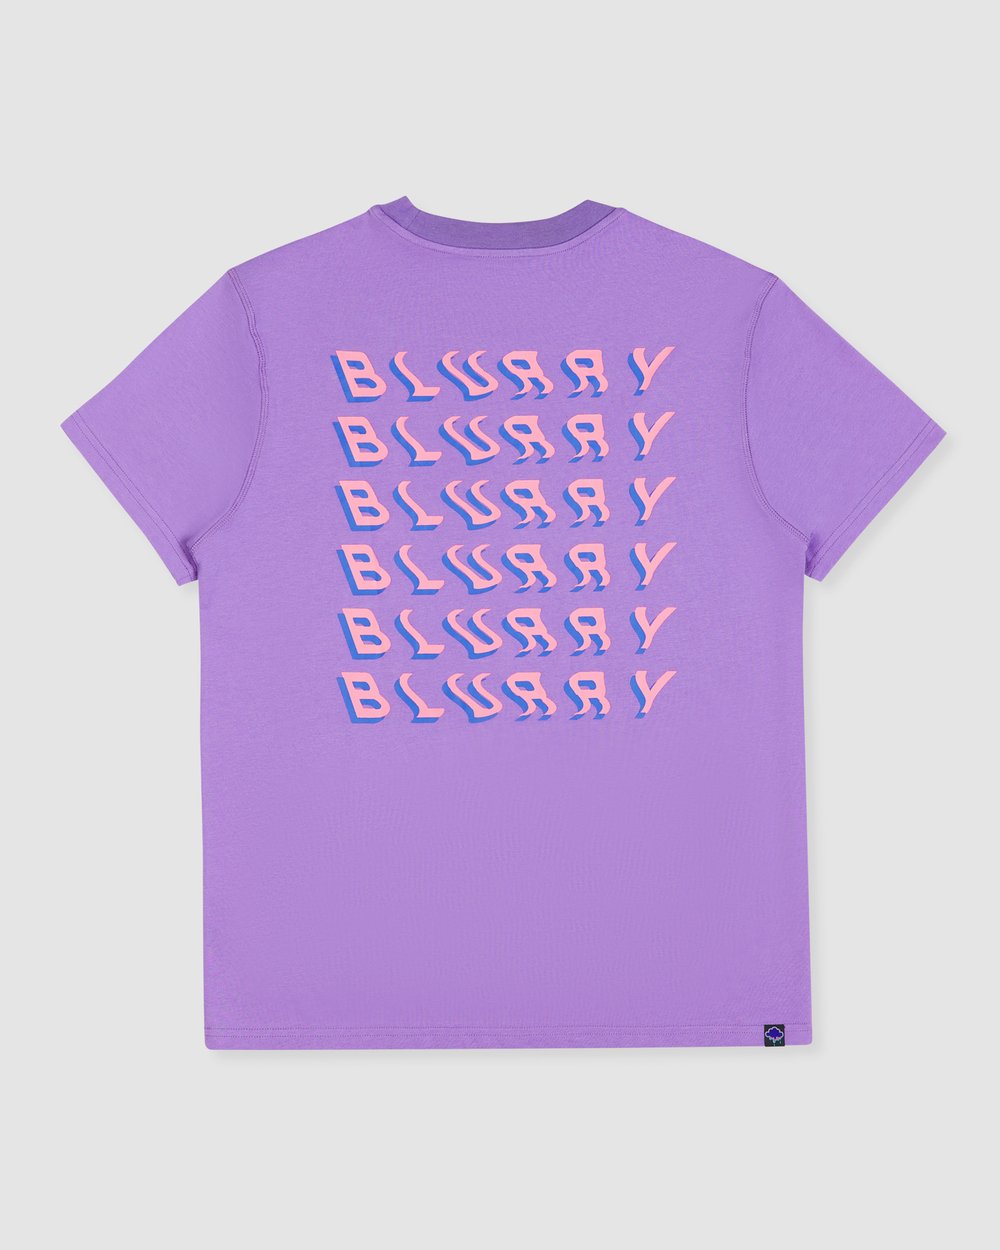 Blurry Images - Blurry Tee Purple